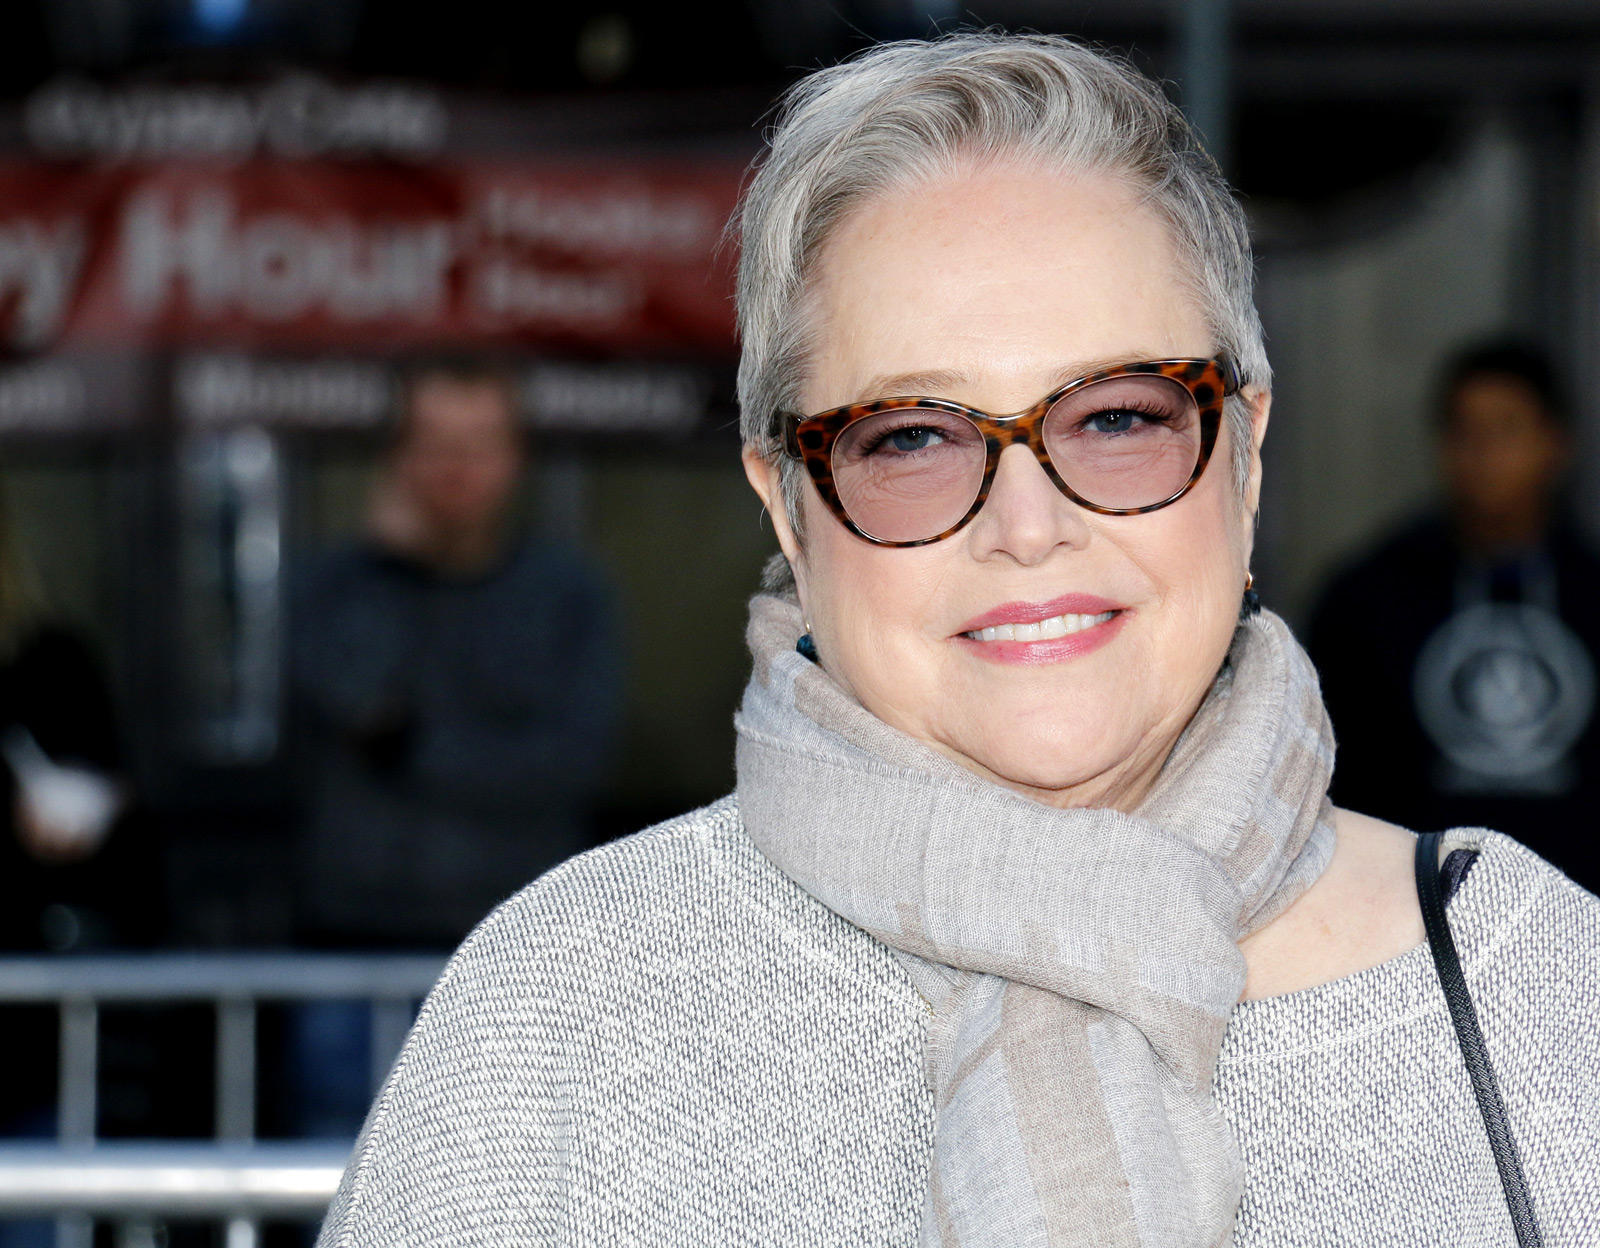 Kathy Bates: My Battle with Lymphedema